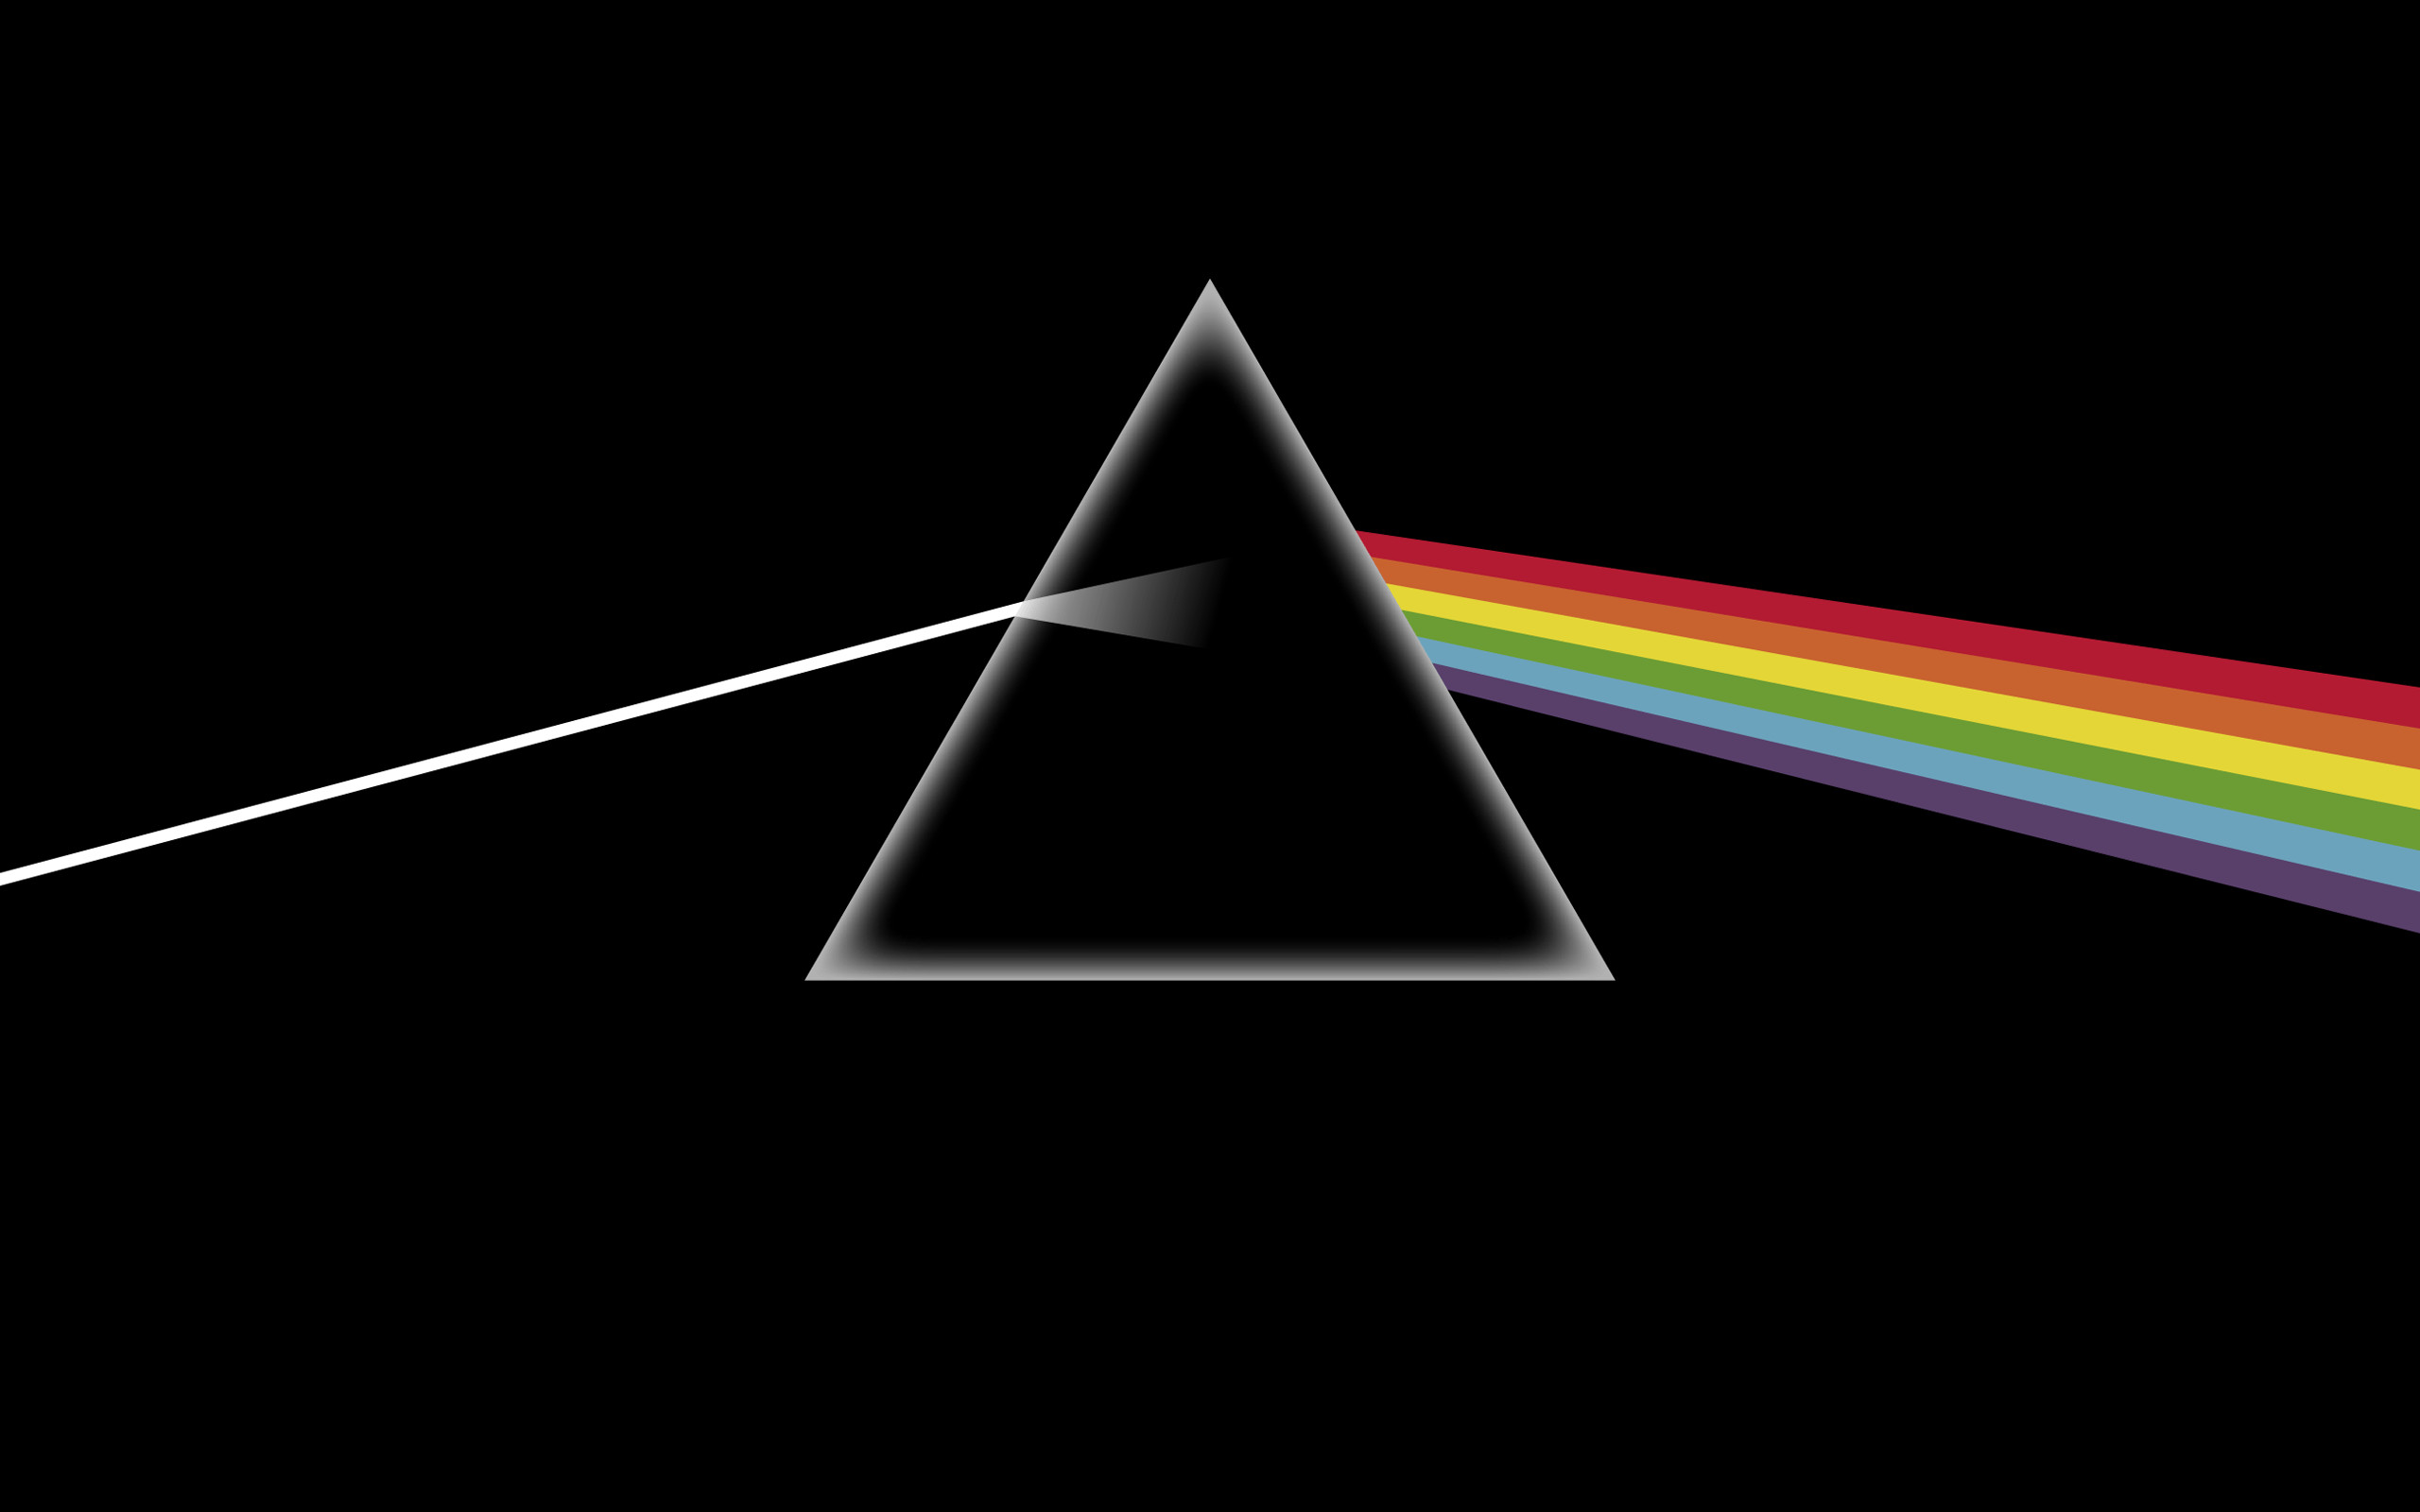 2560x1600 Dark Side of the Moon Wallpaper Pack by alphasnail on DeviantArt